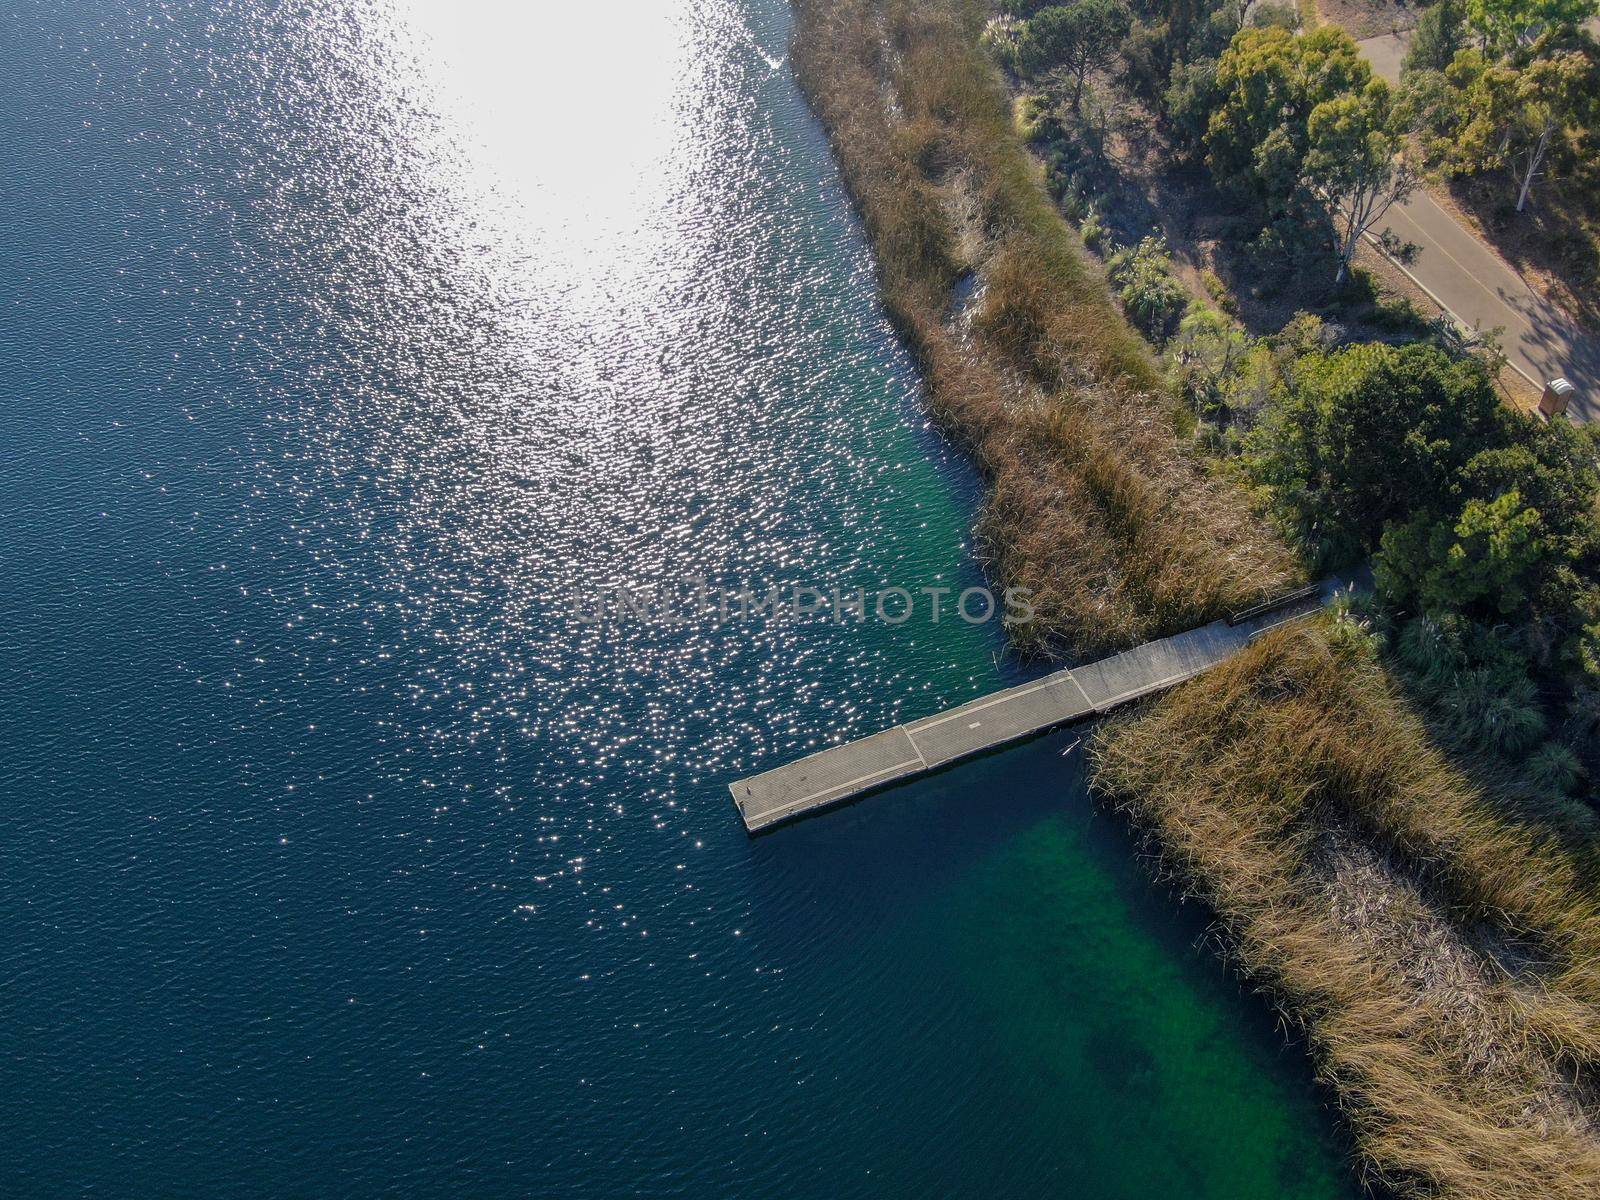 Aerial view of wood pier with fishers and their fishing rods trying to catch fish at the Miramar lake, San Diego, California. USA. Recreation site including boating, fishing, motor boat. 